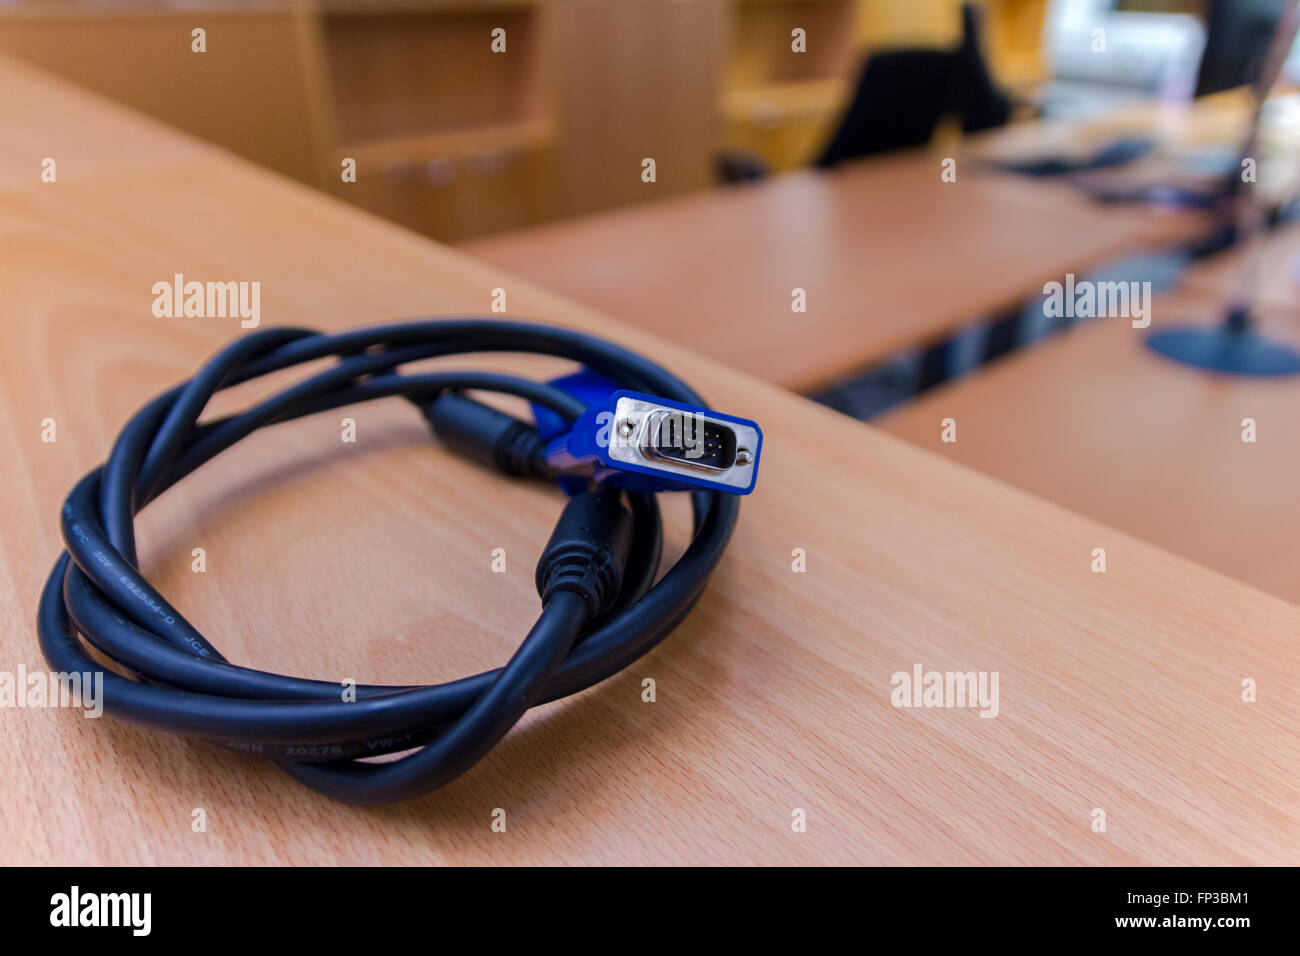 old vga cable in office Stock Photo